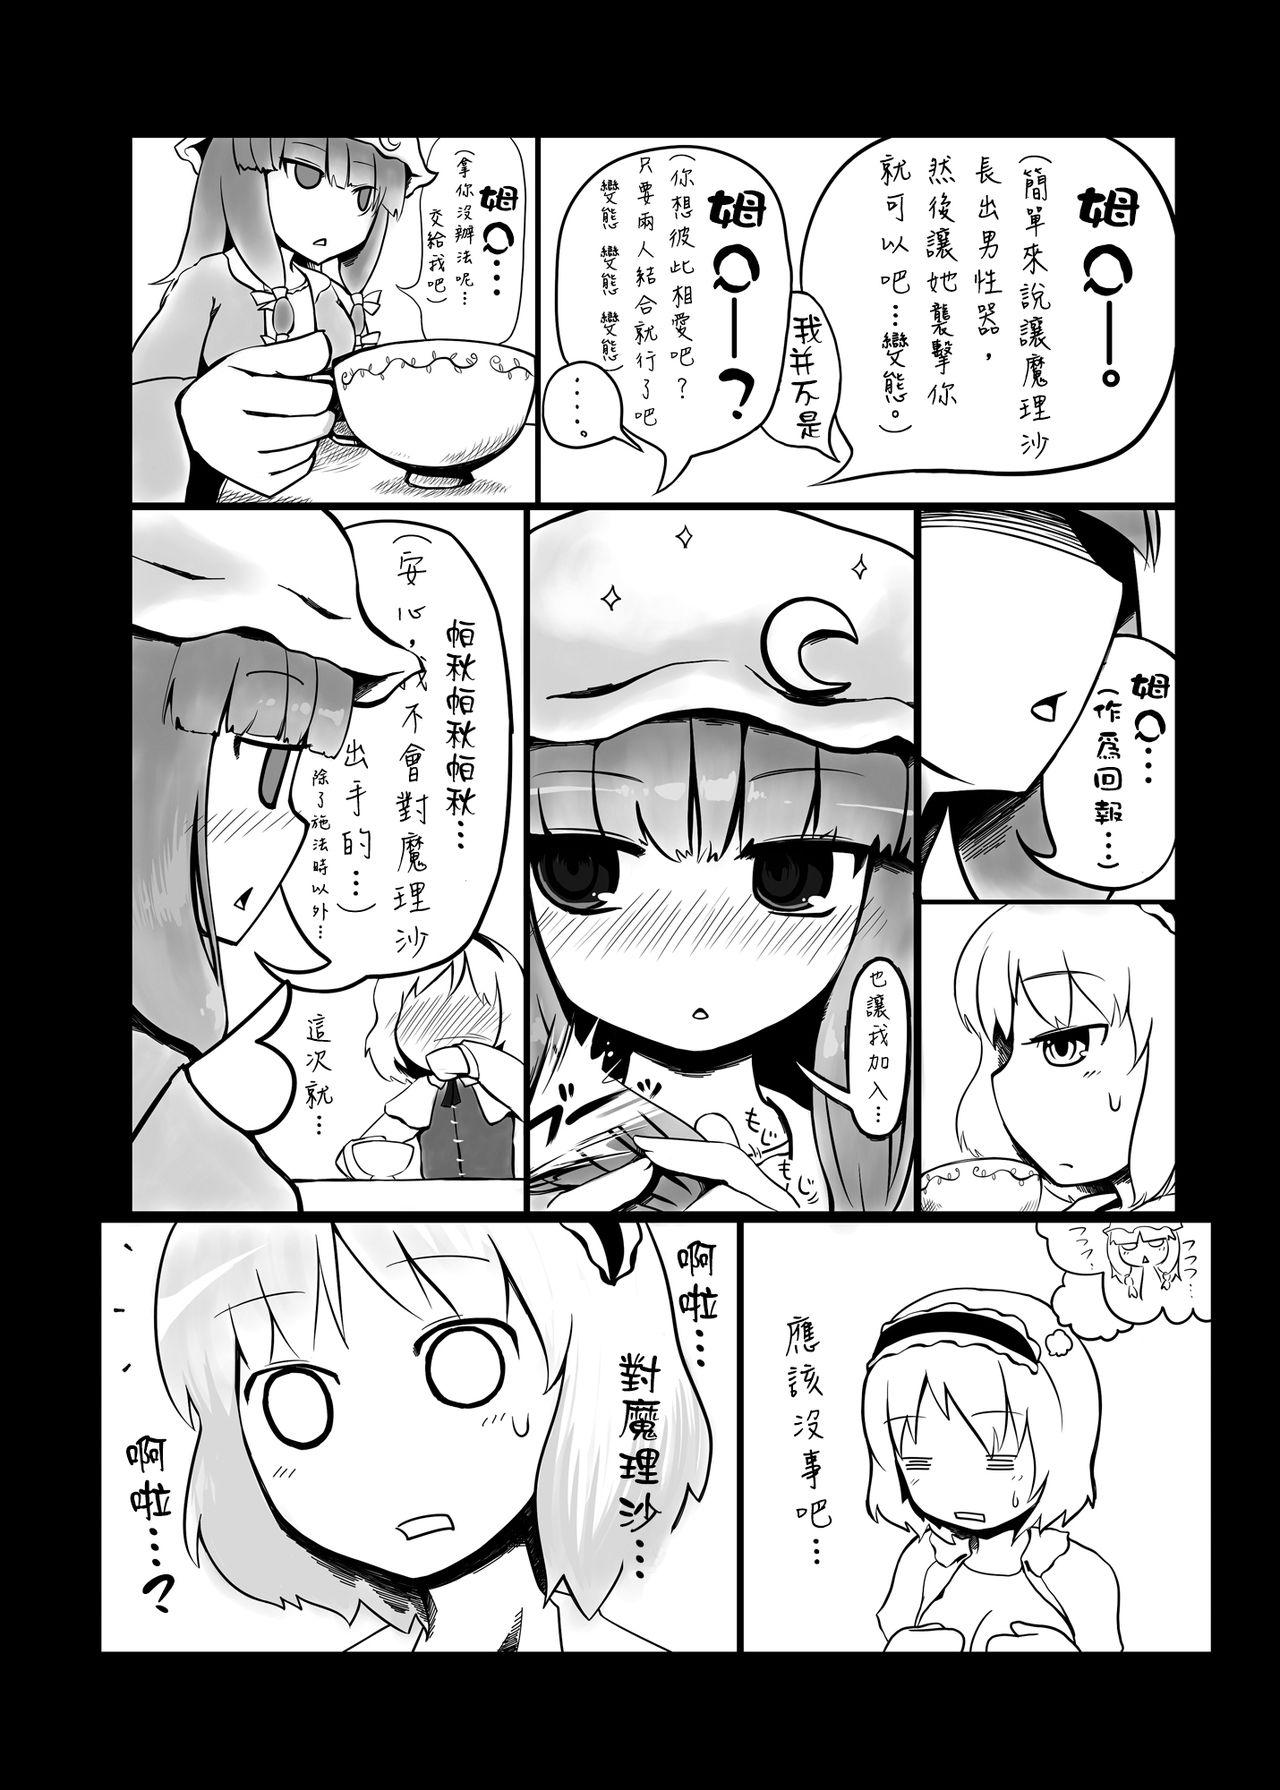 Exhibition Touhou Ero Atsume. - Touhou project Gay 3some - Page 10